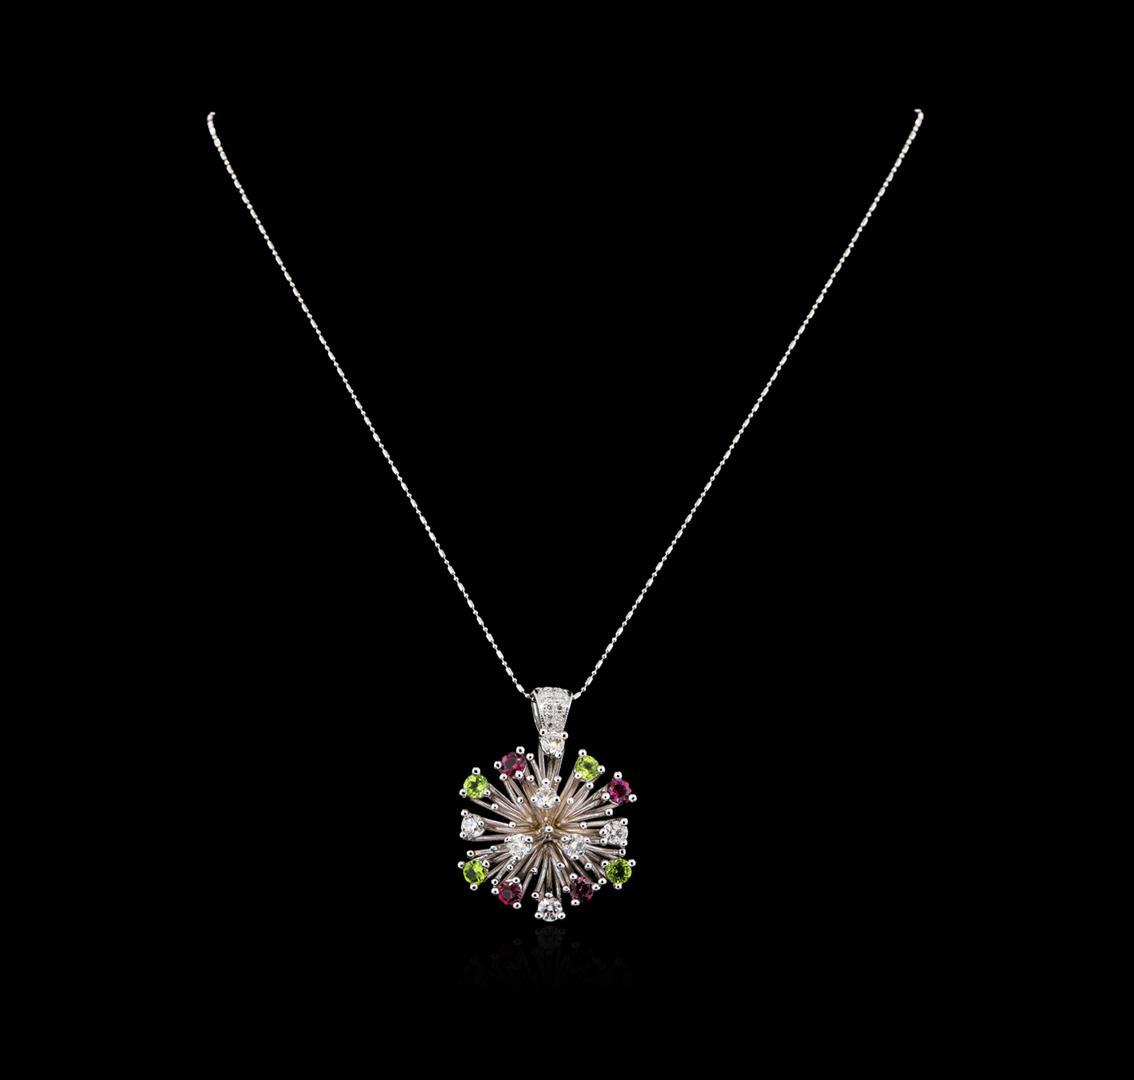 14KT White Gold 2.52 ctw Tourmaline and Diamond Pendant With Chain